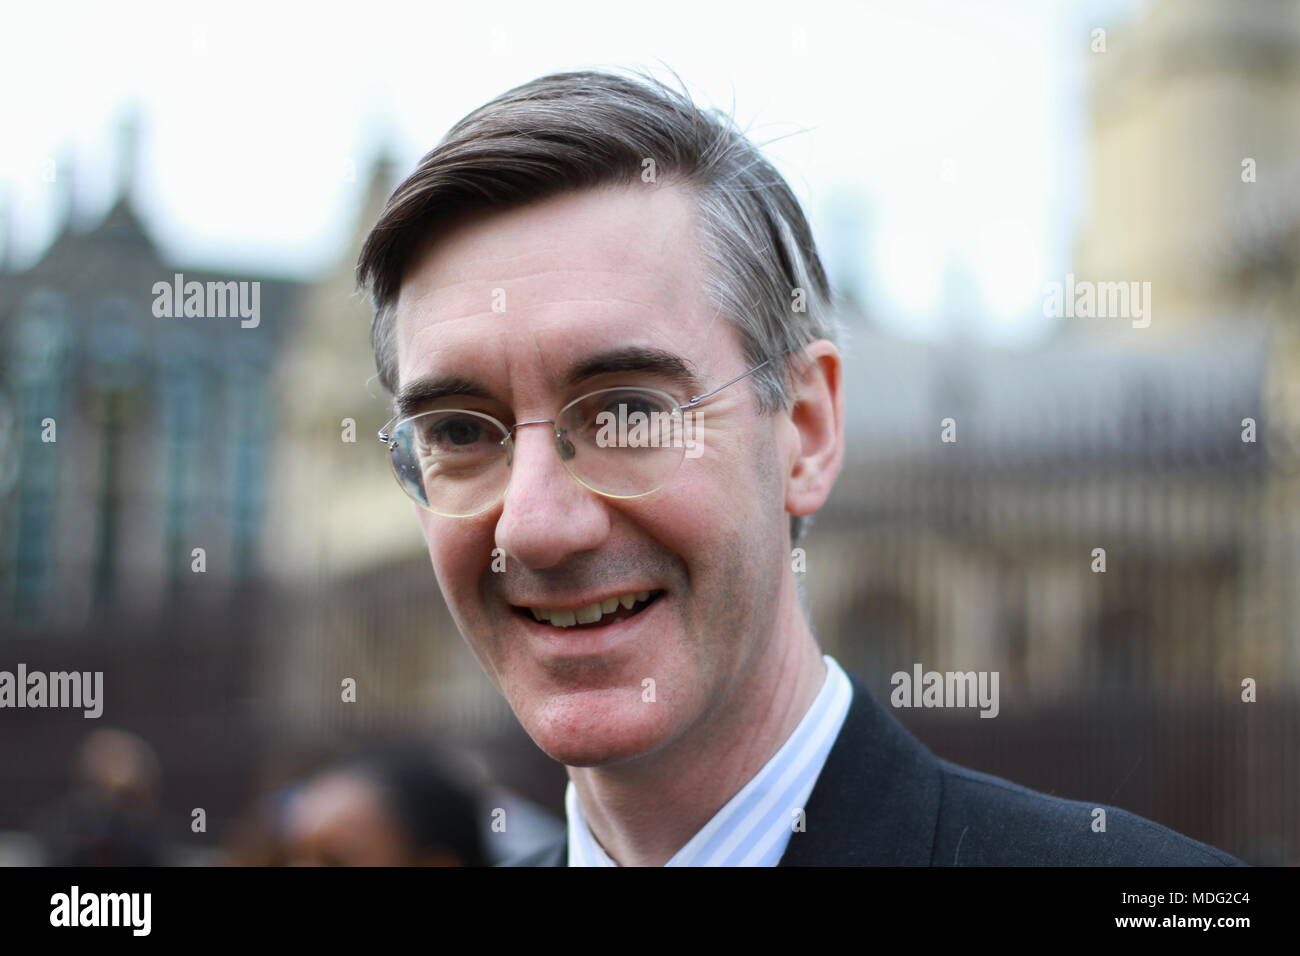 17 April 2018 Jacob Rees-Mogg posed for the photograph in Parliament Square London at the request of the photographer. British politicians. MPS. British politics. ERG. European research group. FAMOUS POLITICIANS. Photo credit Russell Moore. Russell Moore portfolio page. Stock Photo